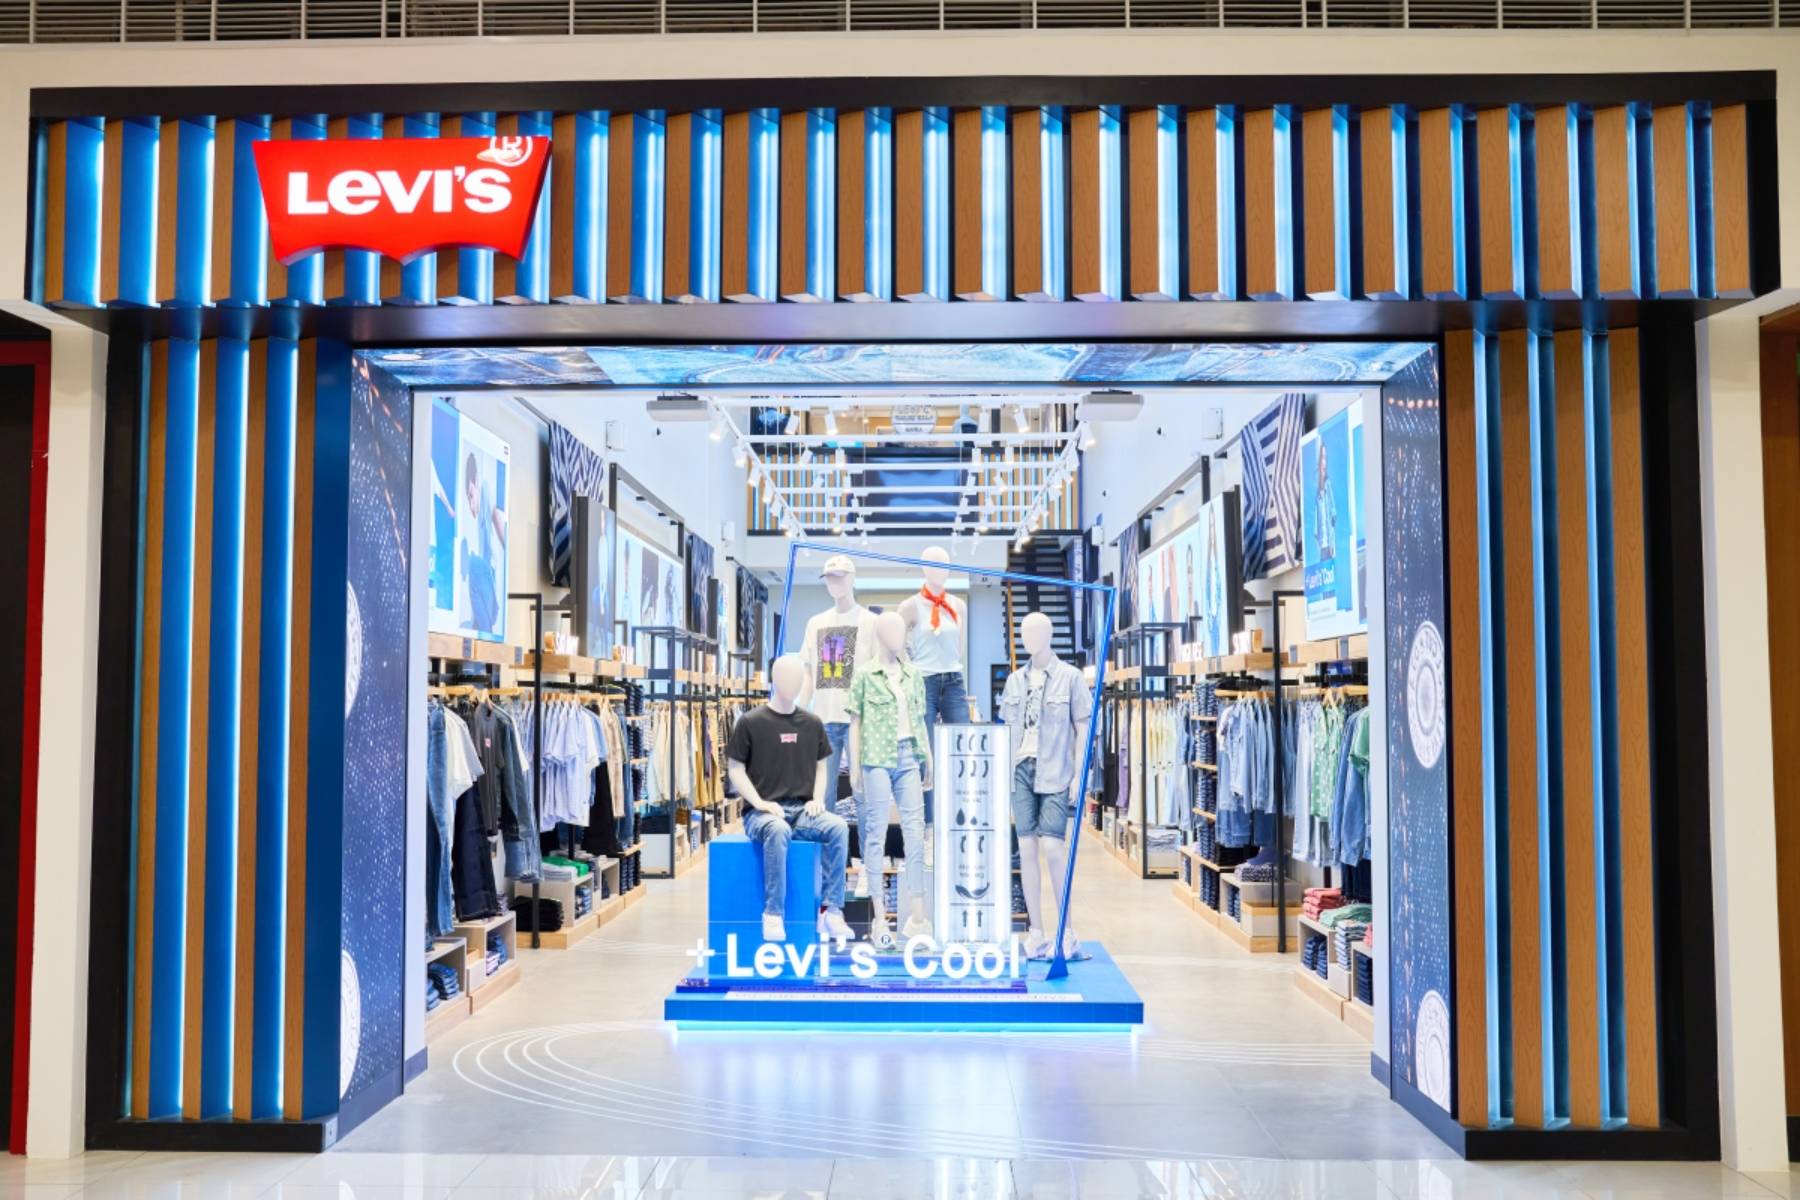 The front of Levi’s SM North EDSA.